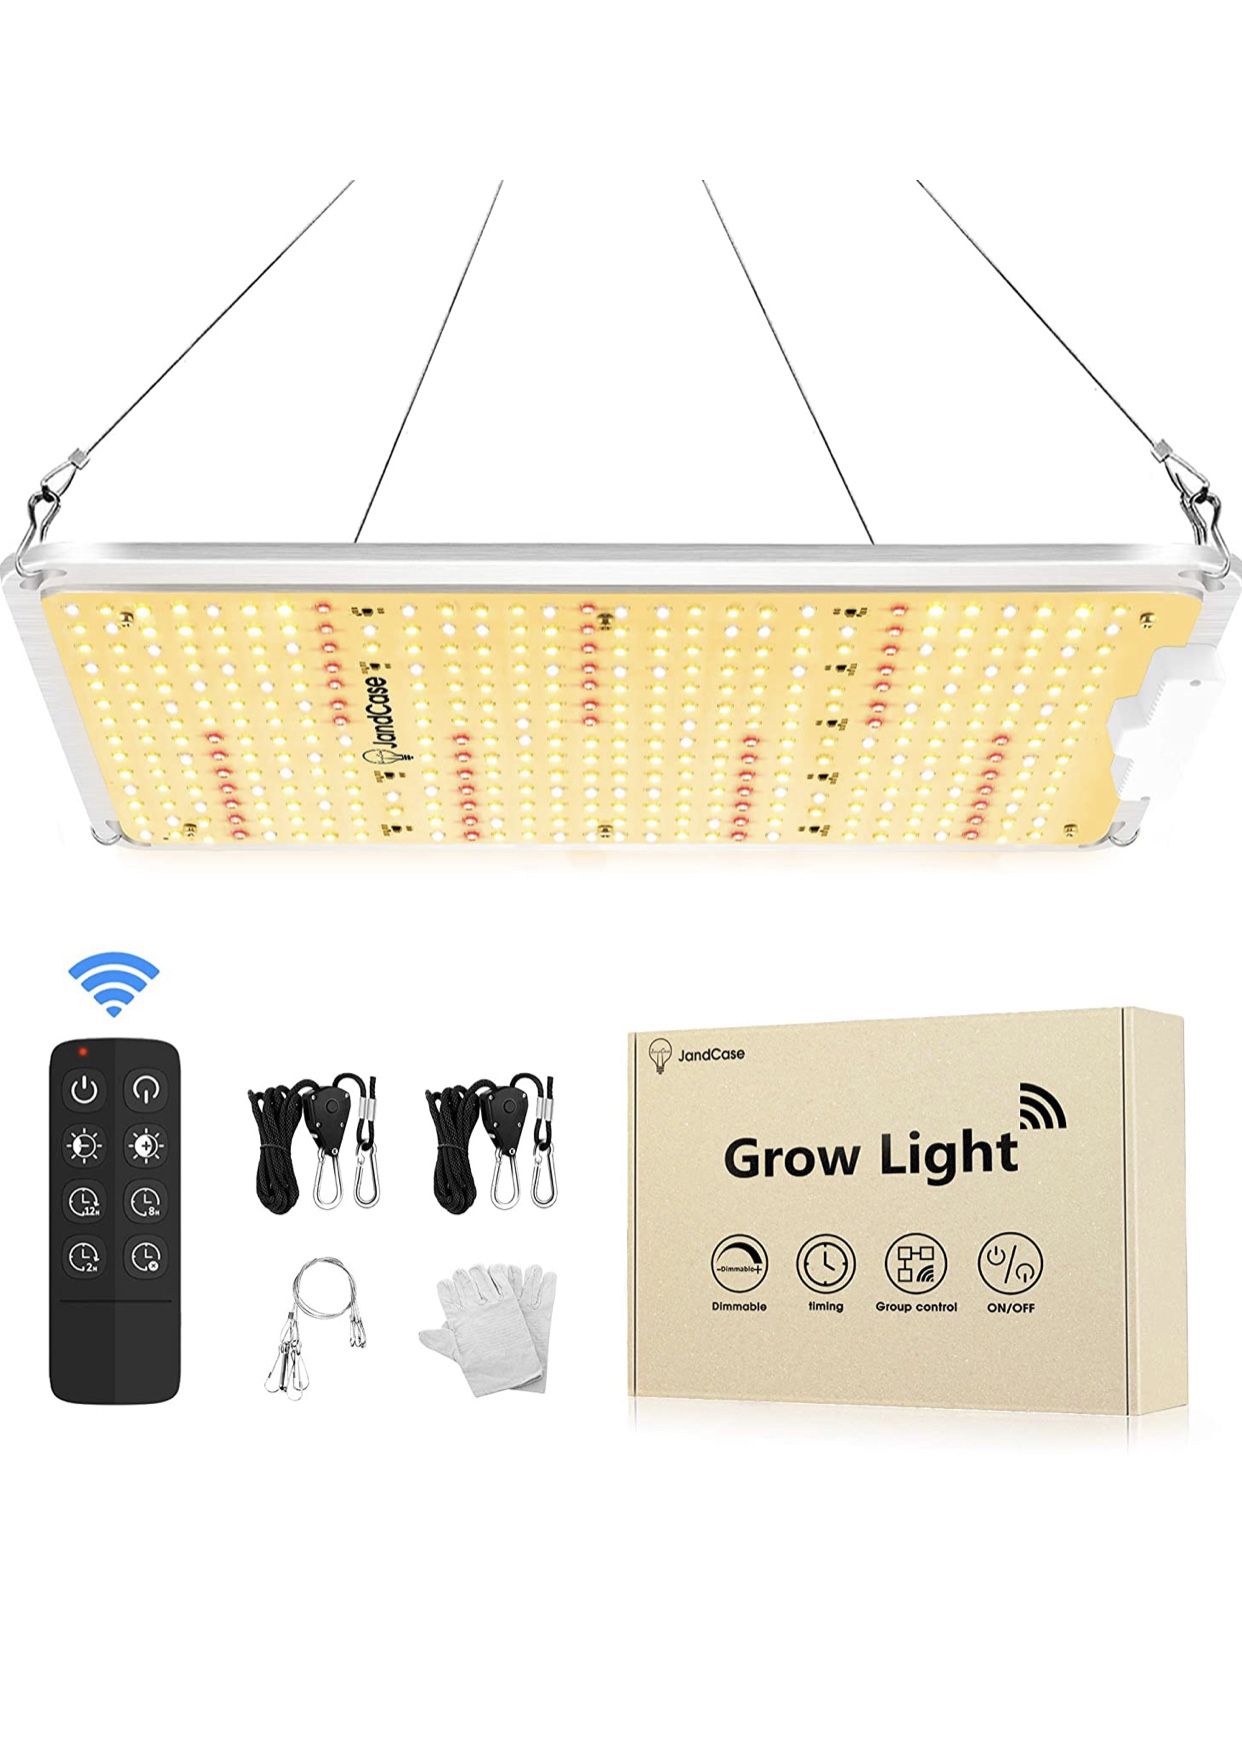 LED Grow Light, 3x3ft Full Spectrum Plant Light, Remote Control & Timer, 5 Dimmable Brightness, 120W, 14200LM, Quantum Board Grow Lamp for Veg, Seedi